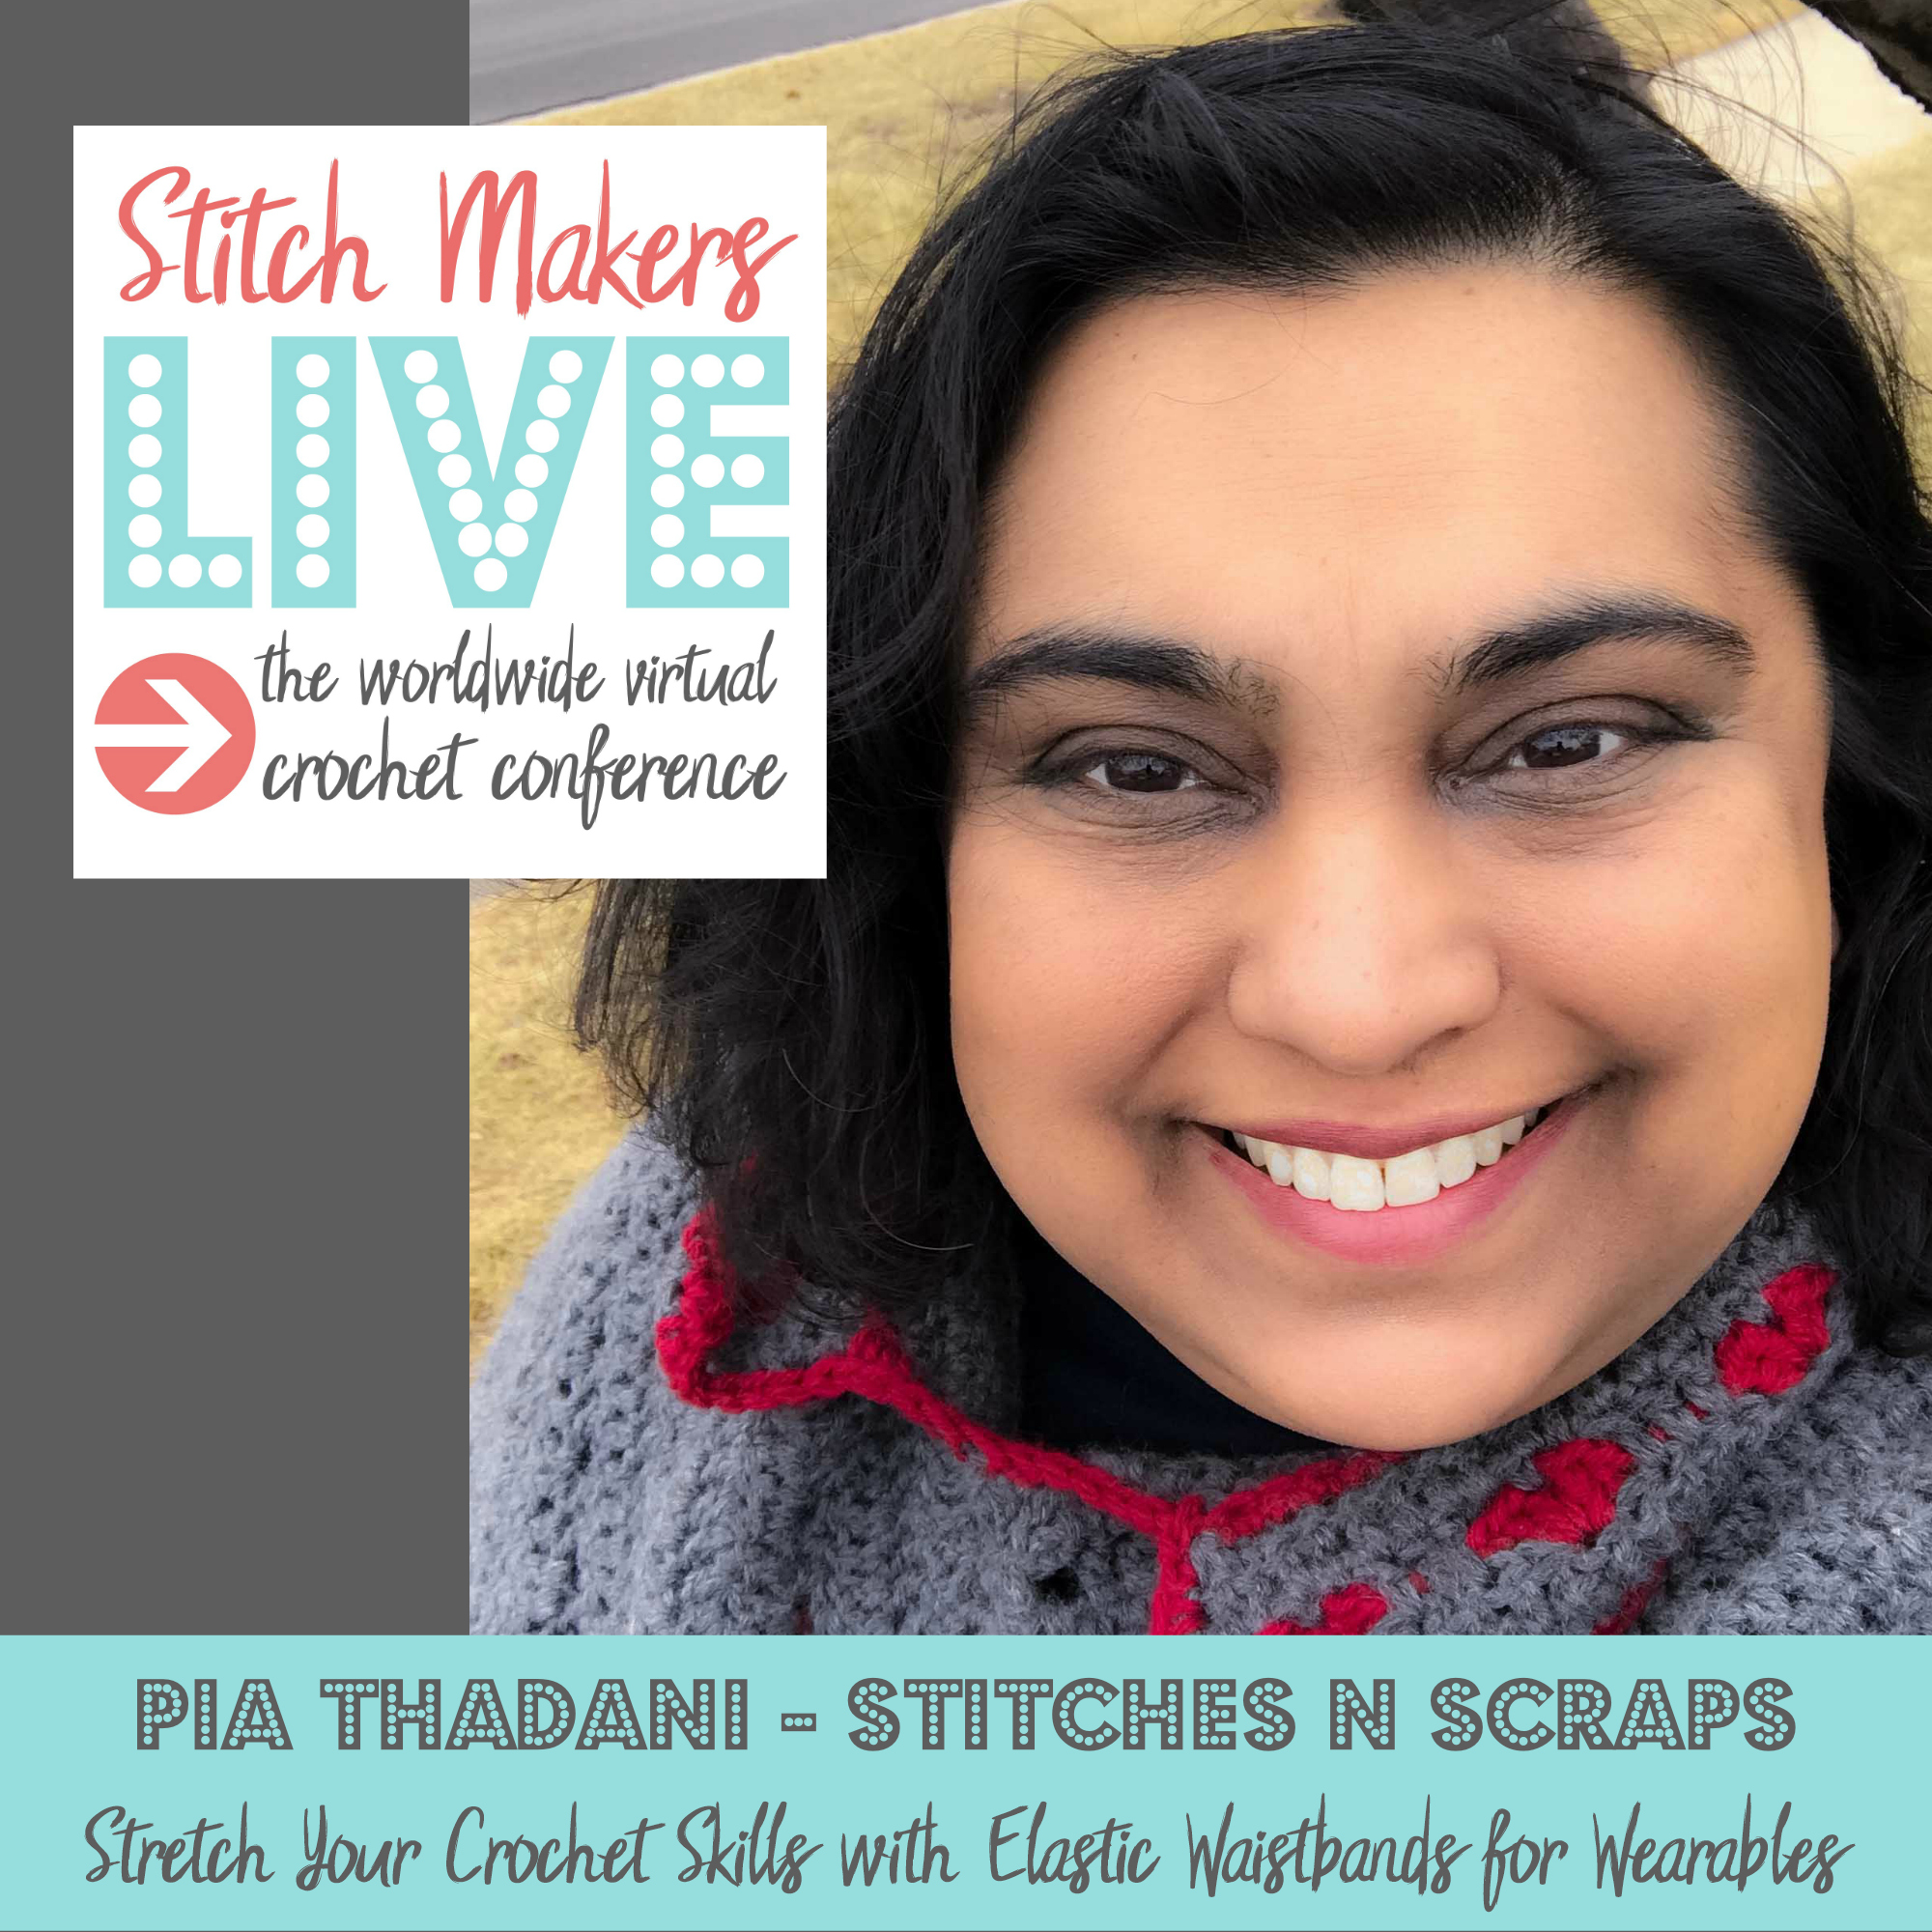 Pia Thadani - one of the teachers of Stitch Makers Live. Text says "Stretch your Crochet Skills with Elastic Wasitbands for Wearables"